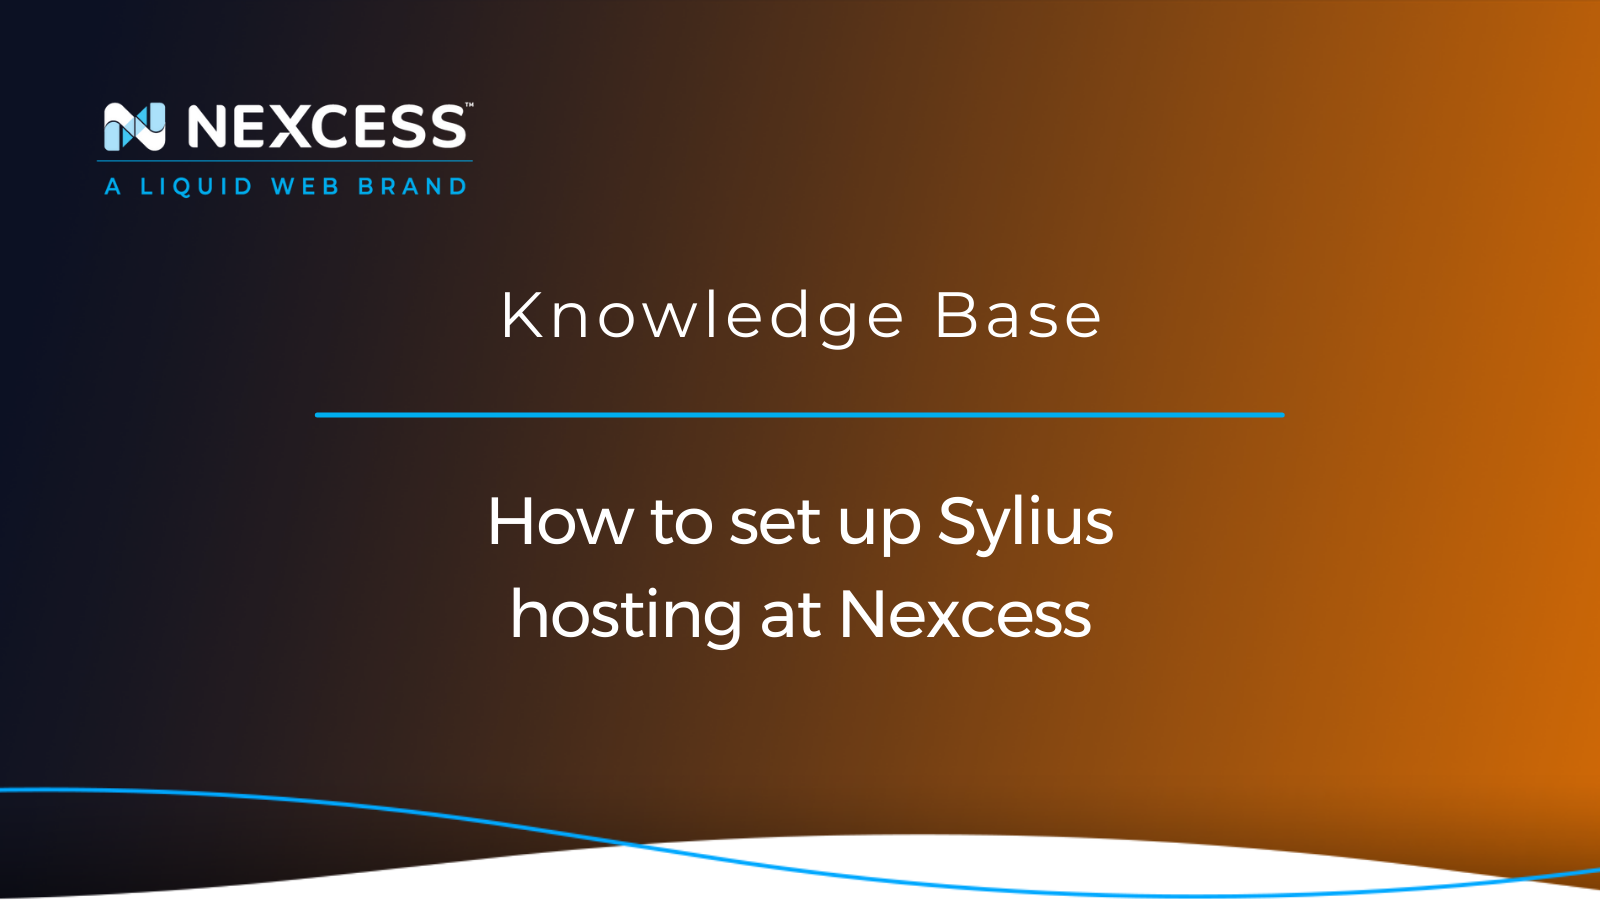 How to set up Sylius hosting at Nexcess